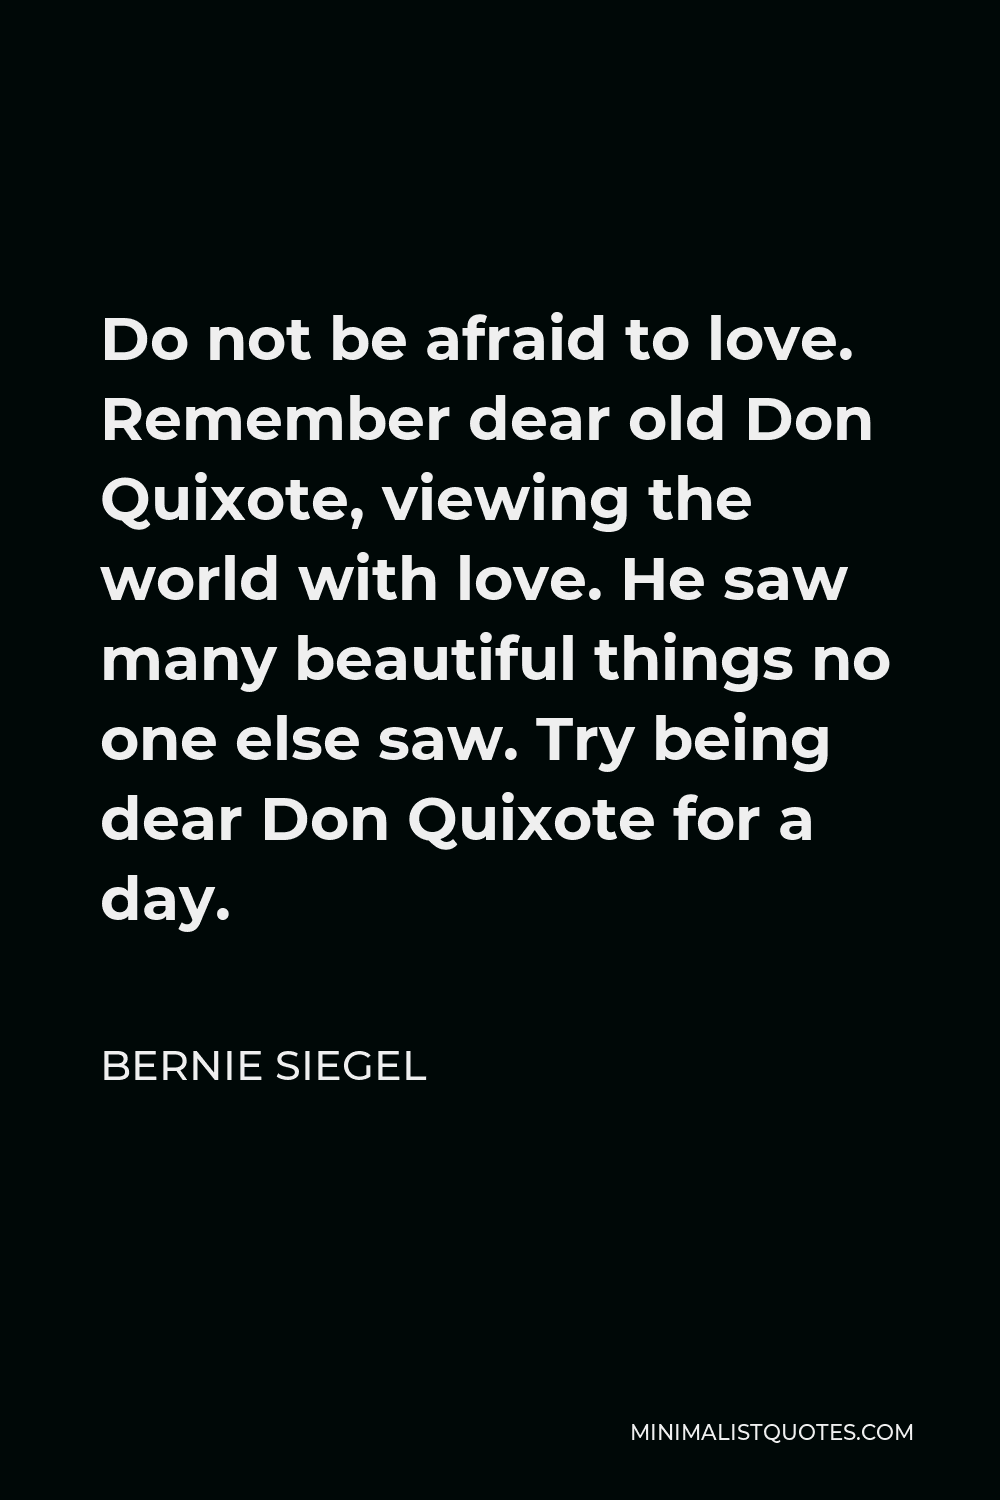 Bernie Siegel Quote - Do not be afraid to love. Remember dear old Don Quixote, viewing the world with love. He saw many beautiful things no one else saw. Try being dear Don Quixote for a day.